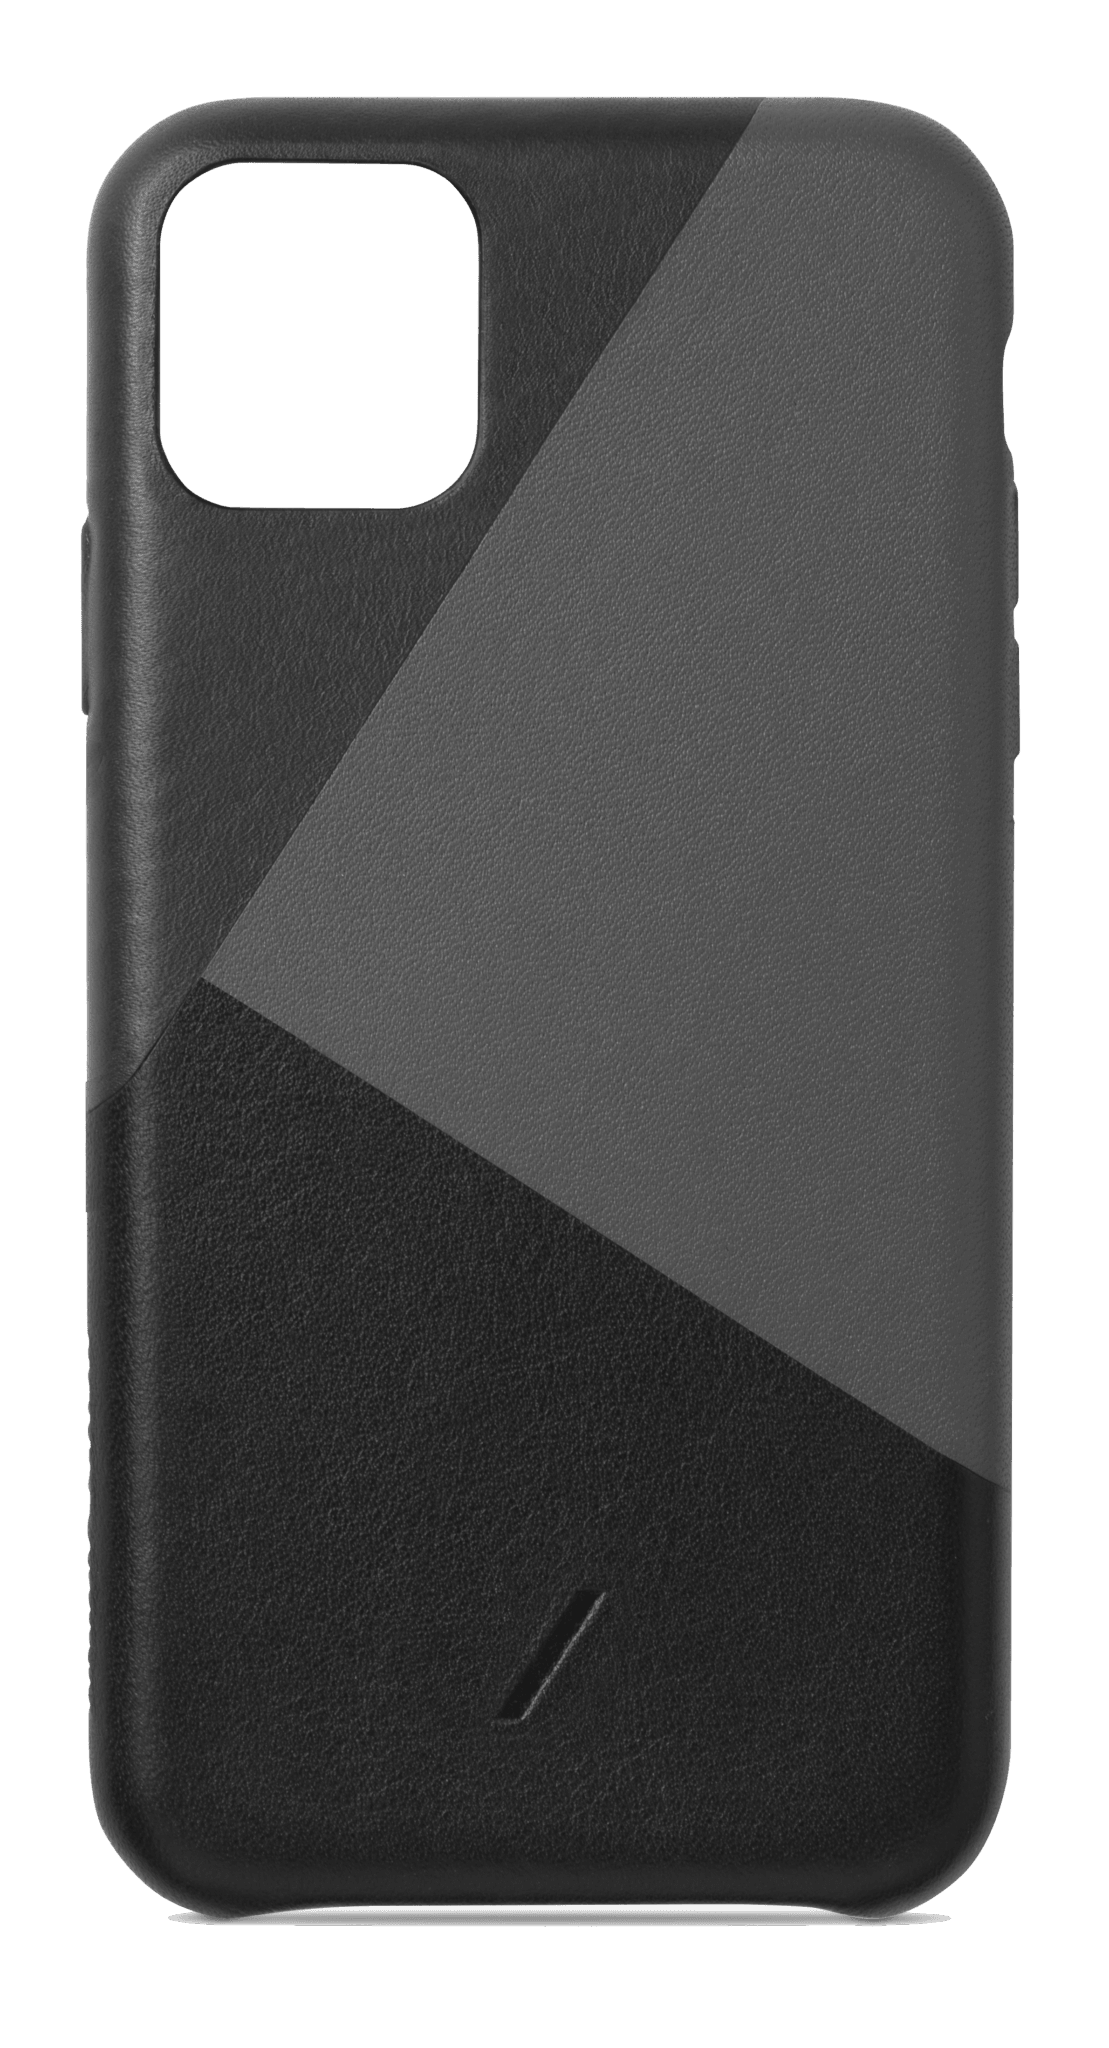 Native Union CLIC Marquetry læder cover til iPhone 11 Pro Max - Kosmos Renew